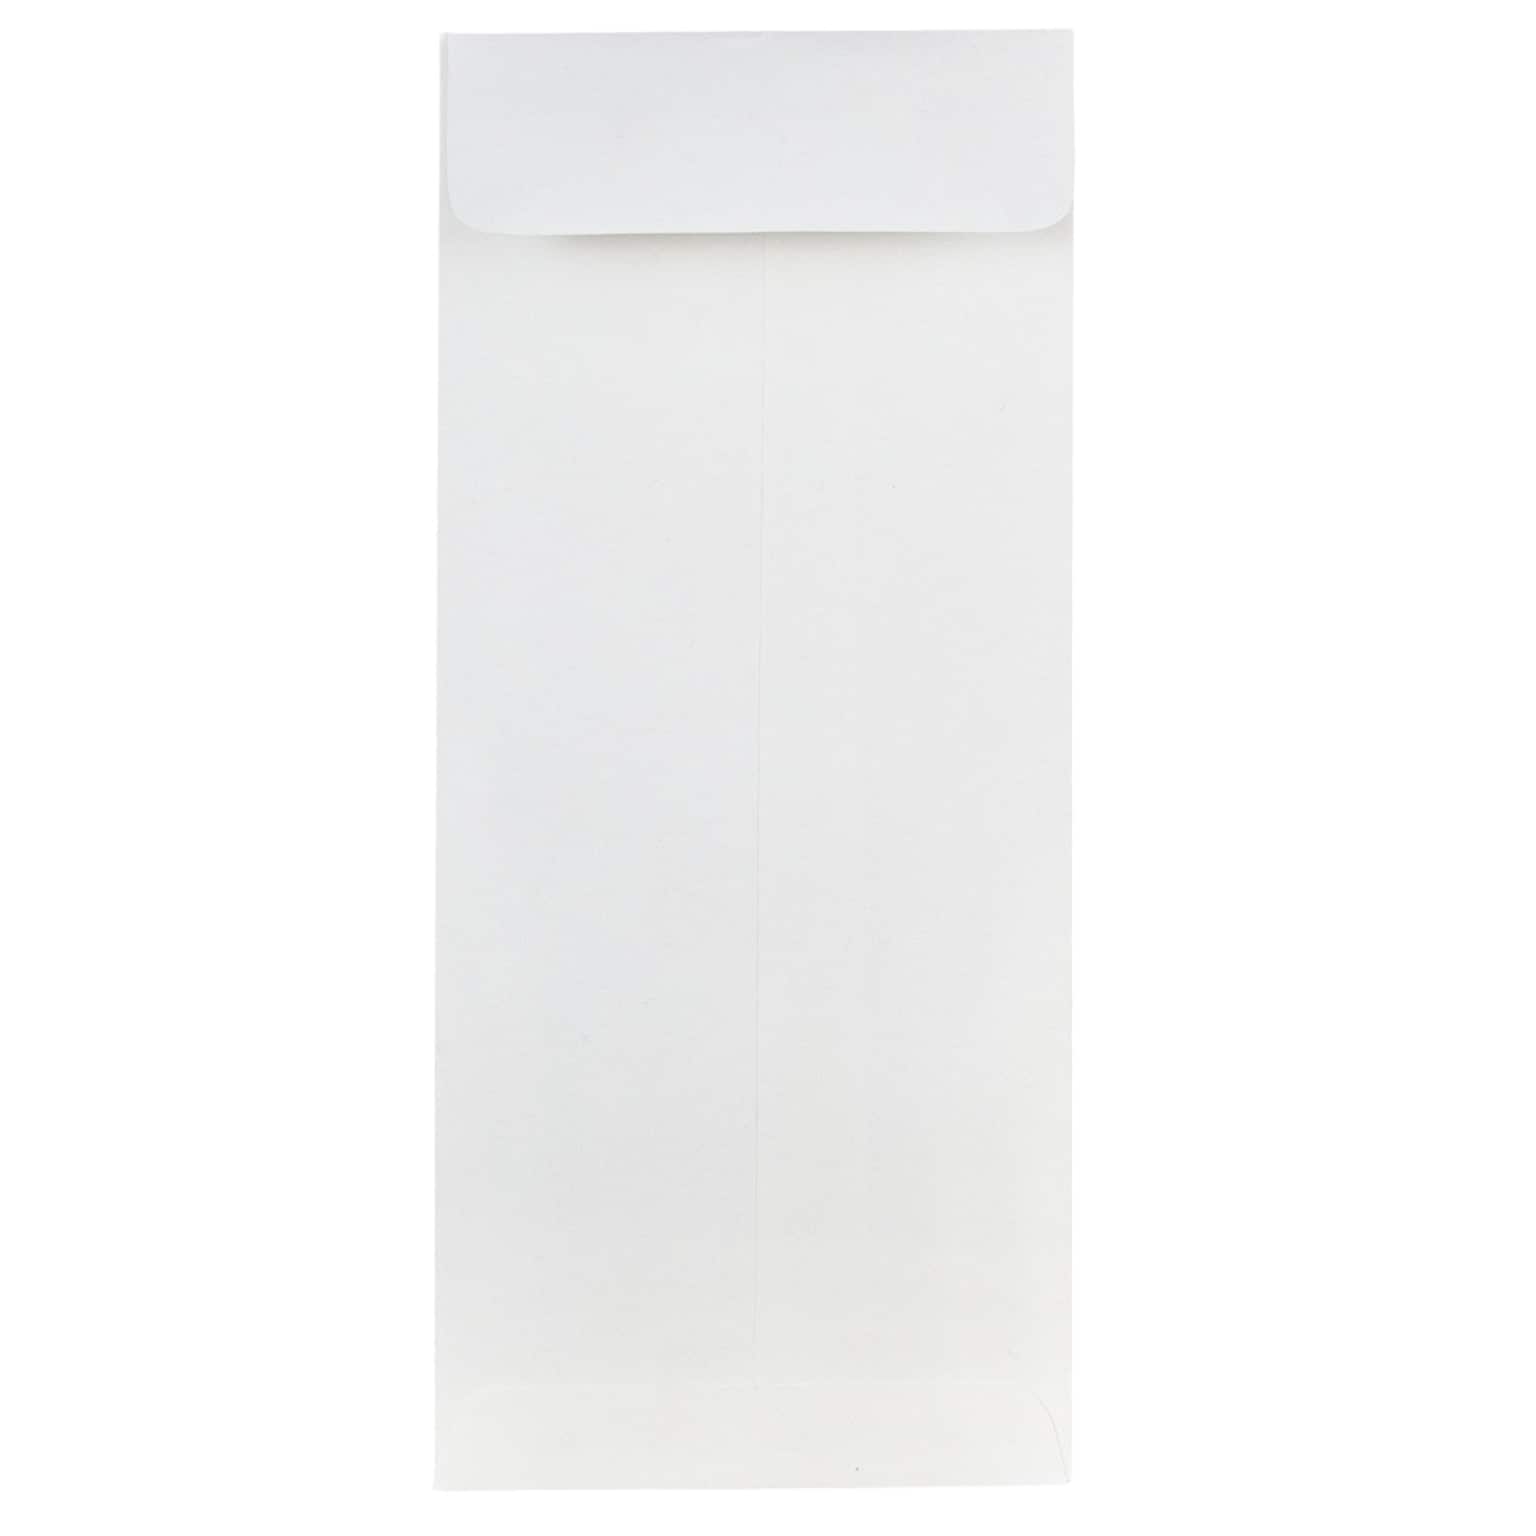 JAM Paper #10 Policy Business Strathmore Envelopes, 4 1/8 x 9 1/2, Bright White Wove, 25/Pack (191248)